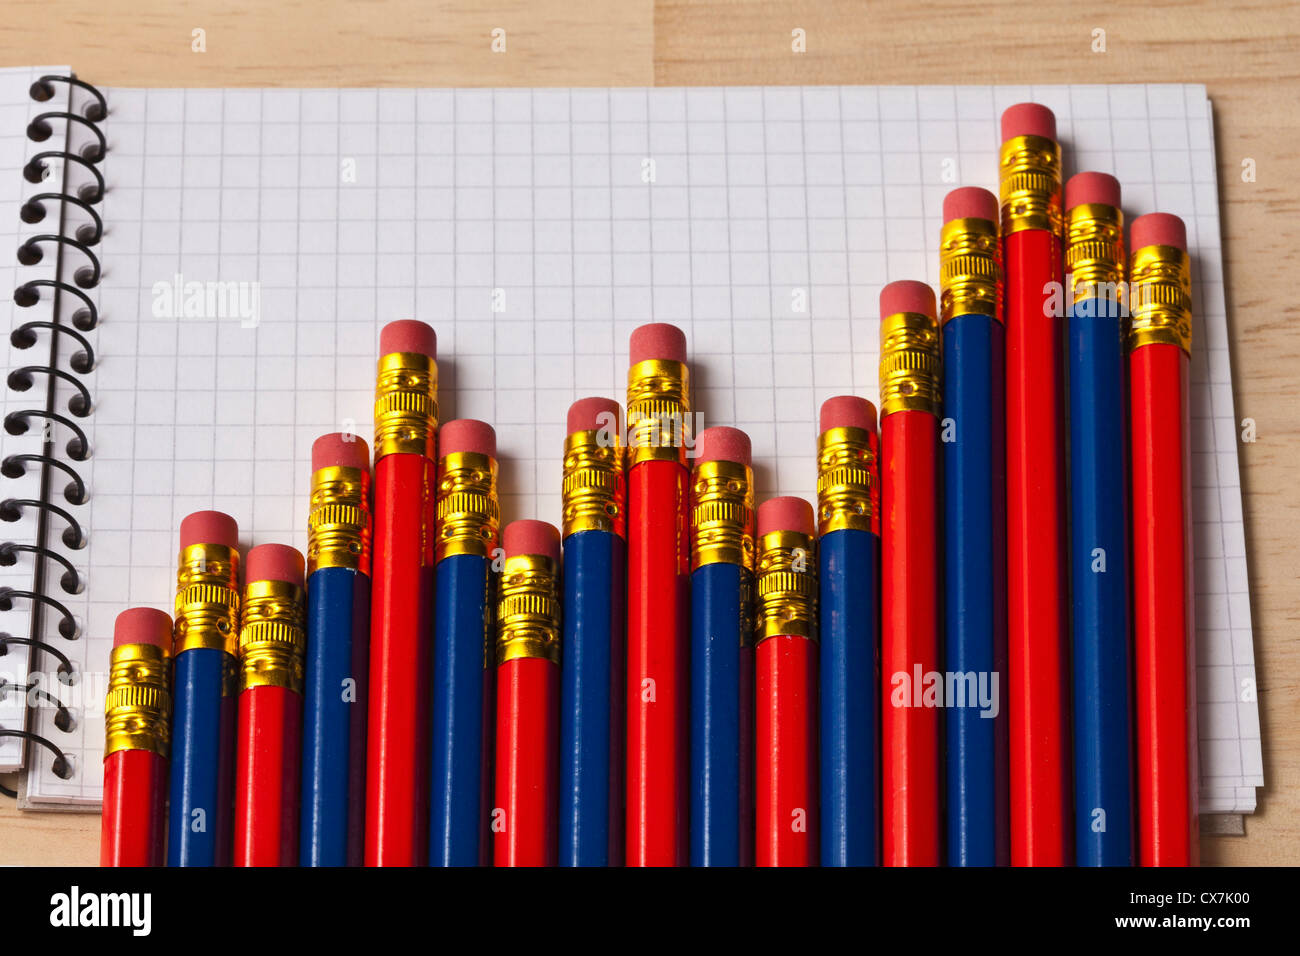 A bar graph made from the eraser end of blue and red pencils Stock Photo